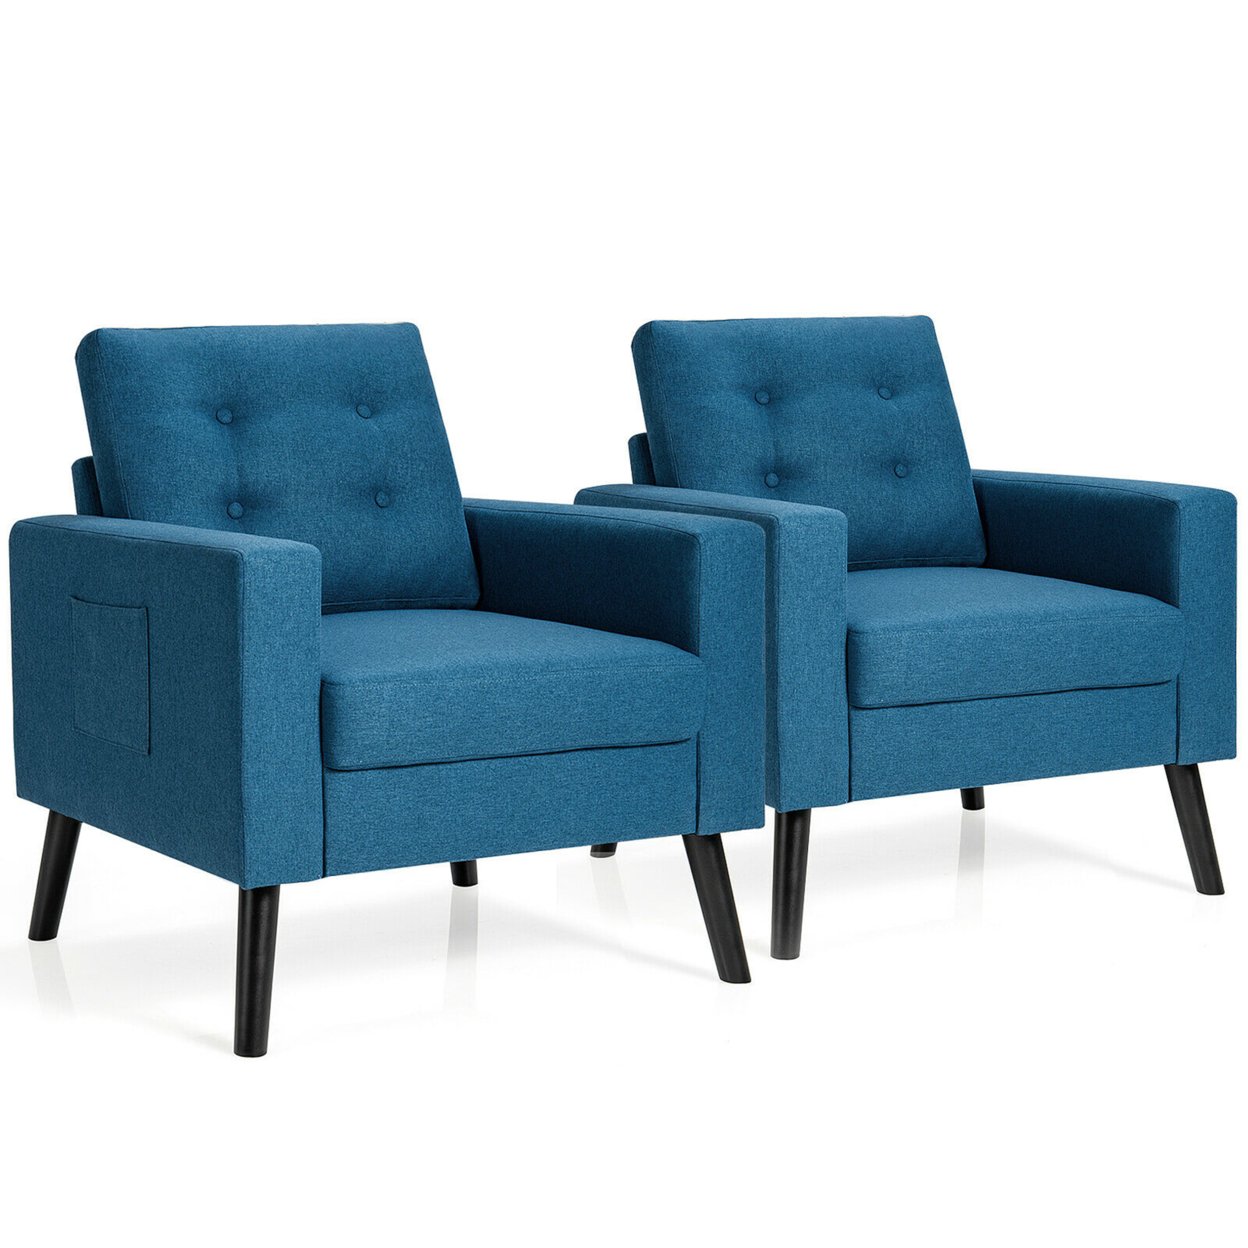 Set Of 2 Upholstered Accent Chair Single Sofa Armchair W/ Wooden Legs - Navy